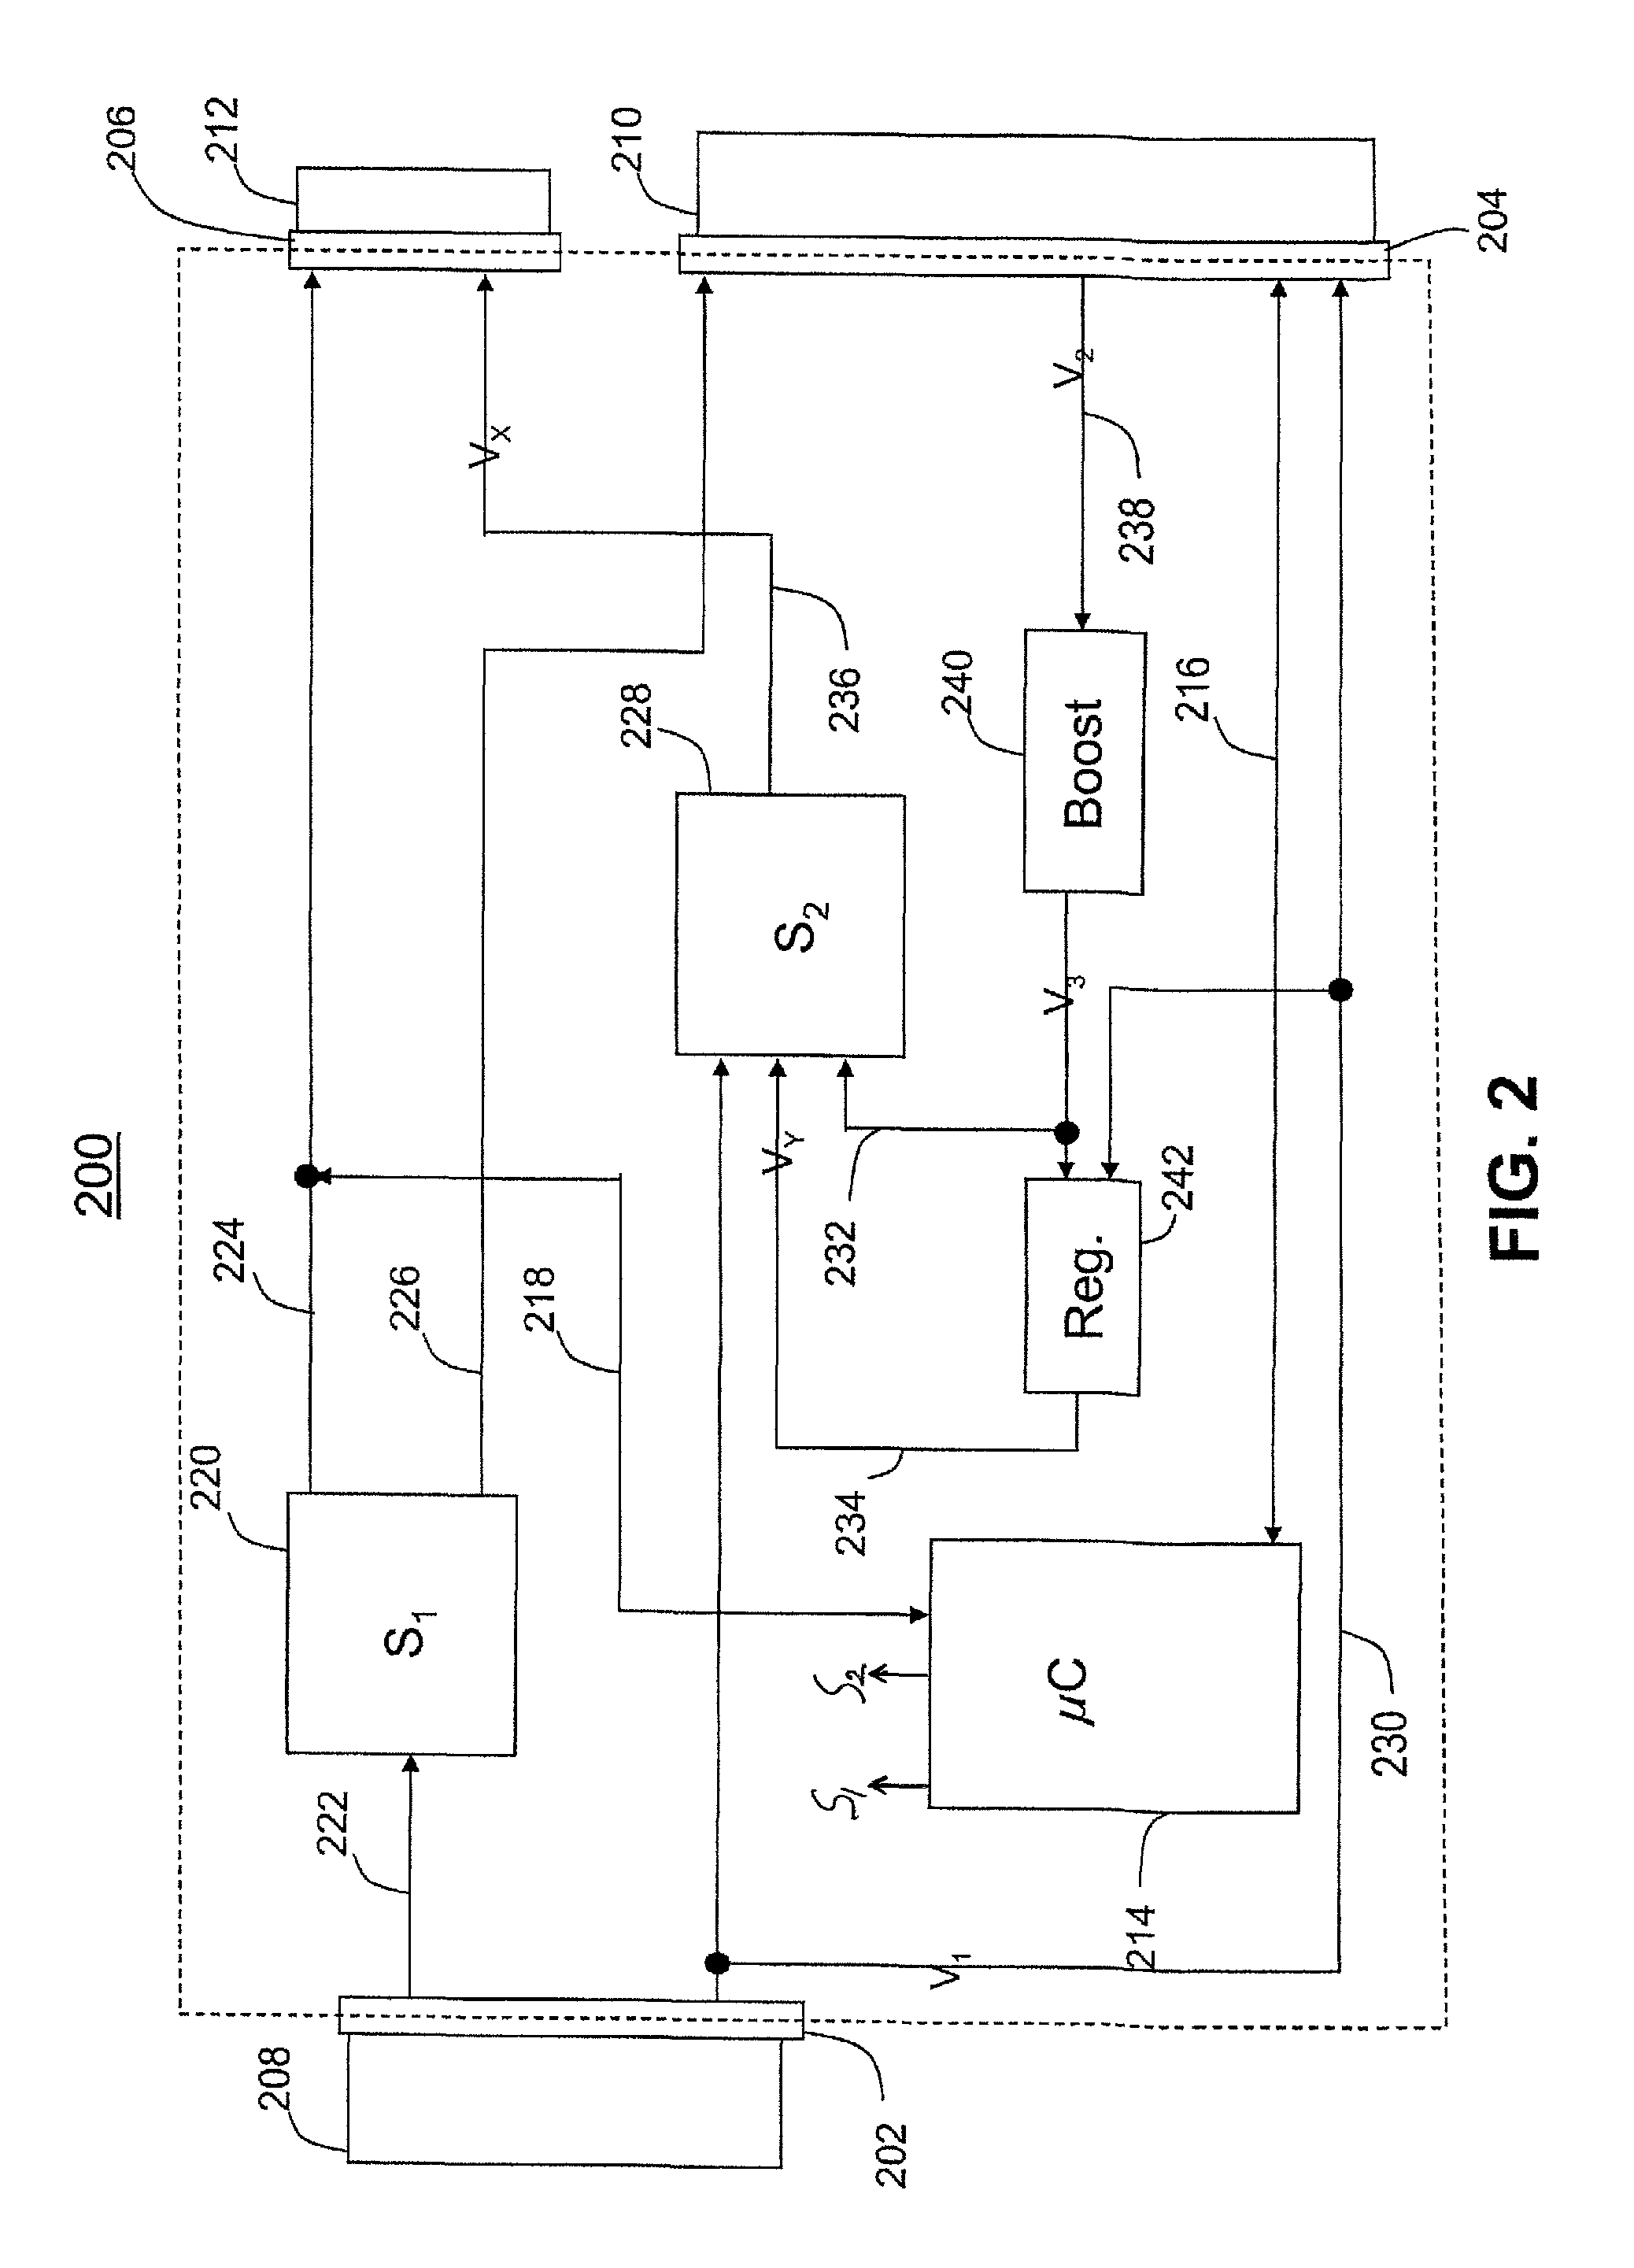 Apparatuses and methods that facilitate the transfer of power and information among electrical devices